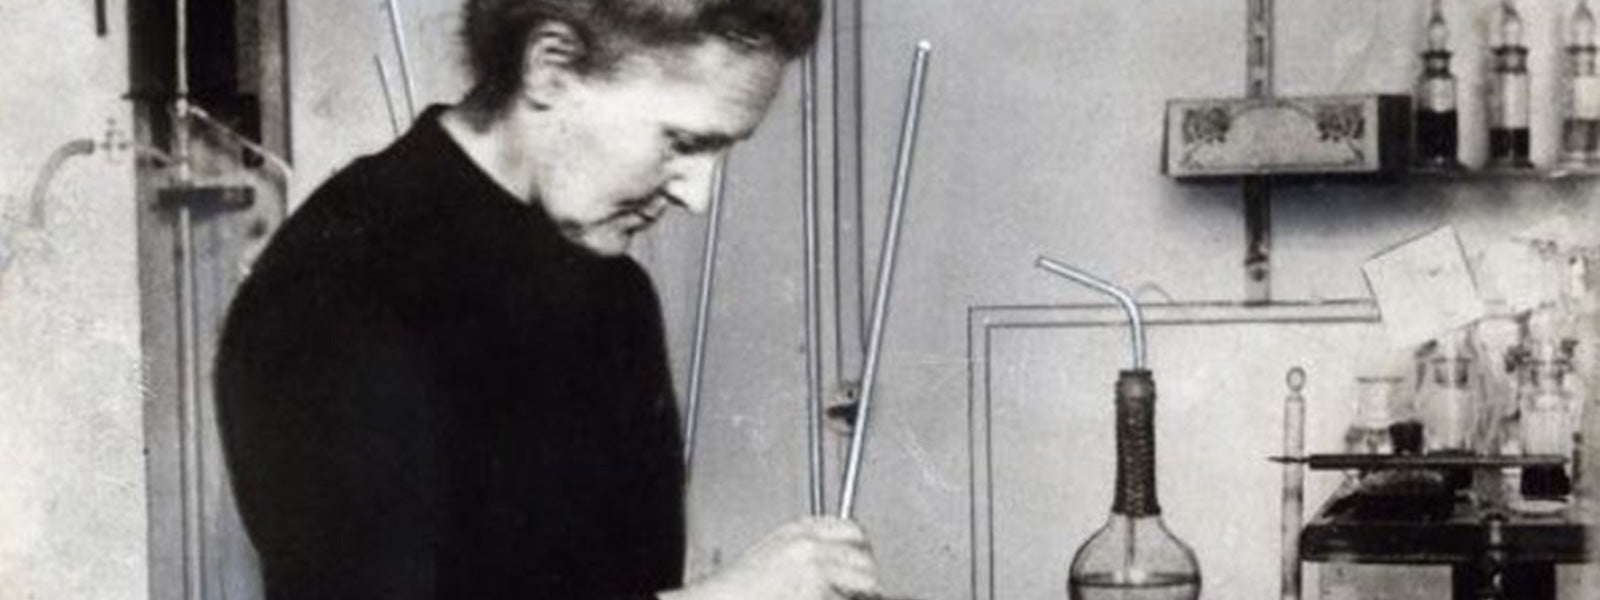 Beautiful Equations Blog - 3 Inspirational Women in Science. An old black and white photograph of Marie Curie in her laboratory.